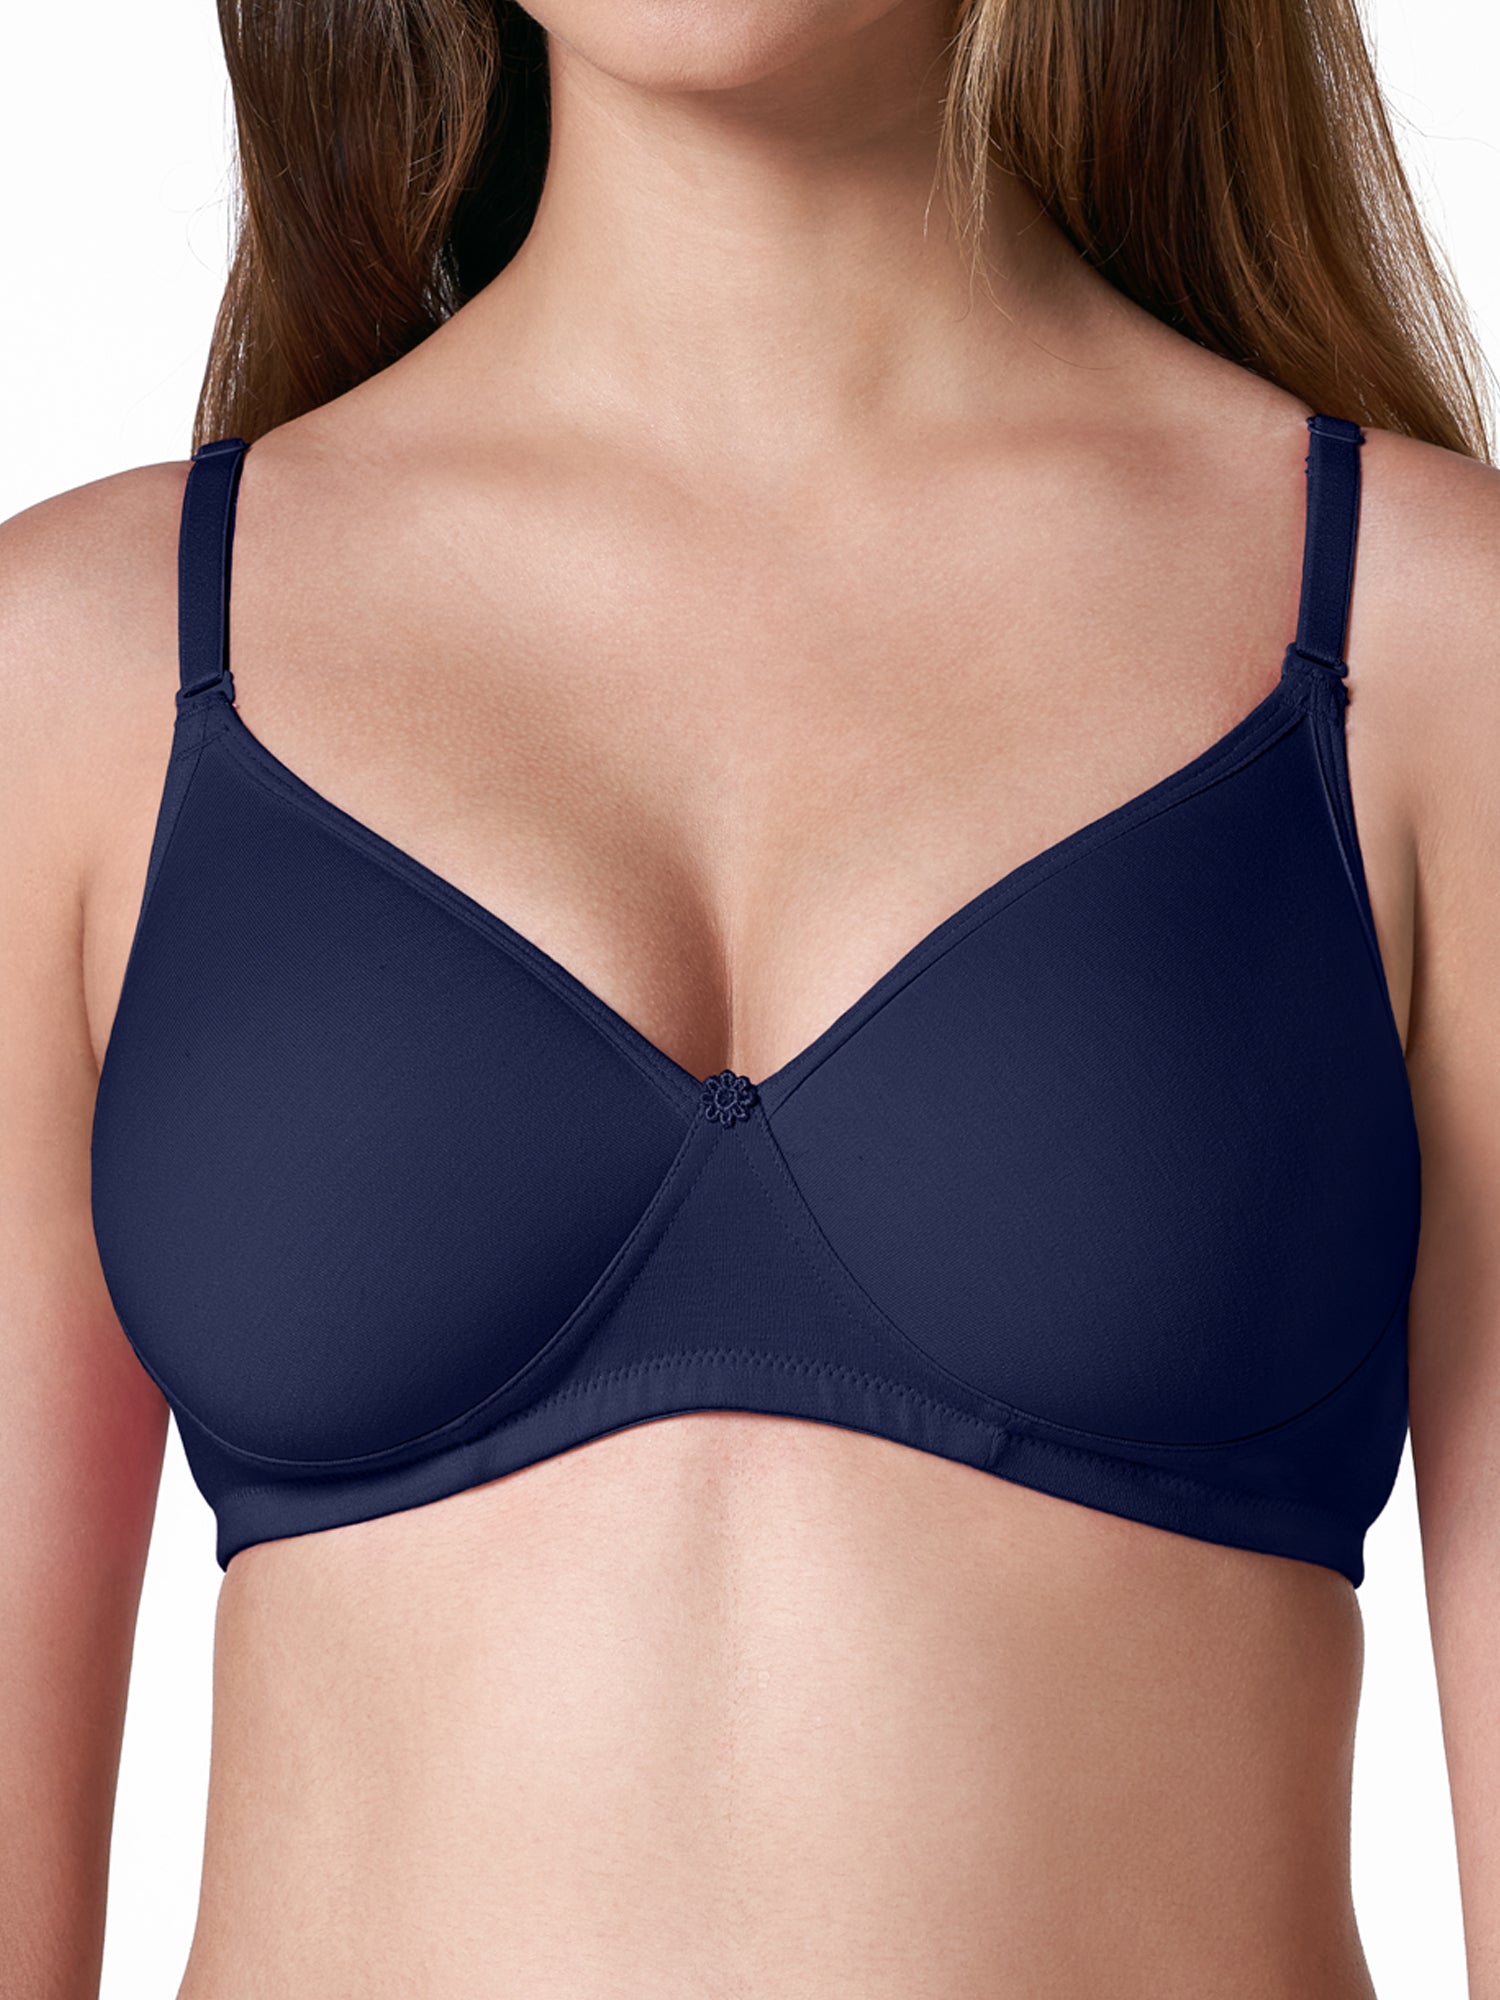 blossom-well mould-navy blue1-thick padded-padded bra